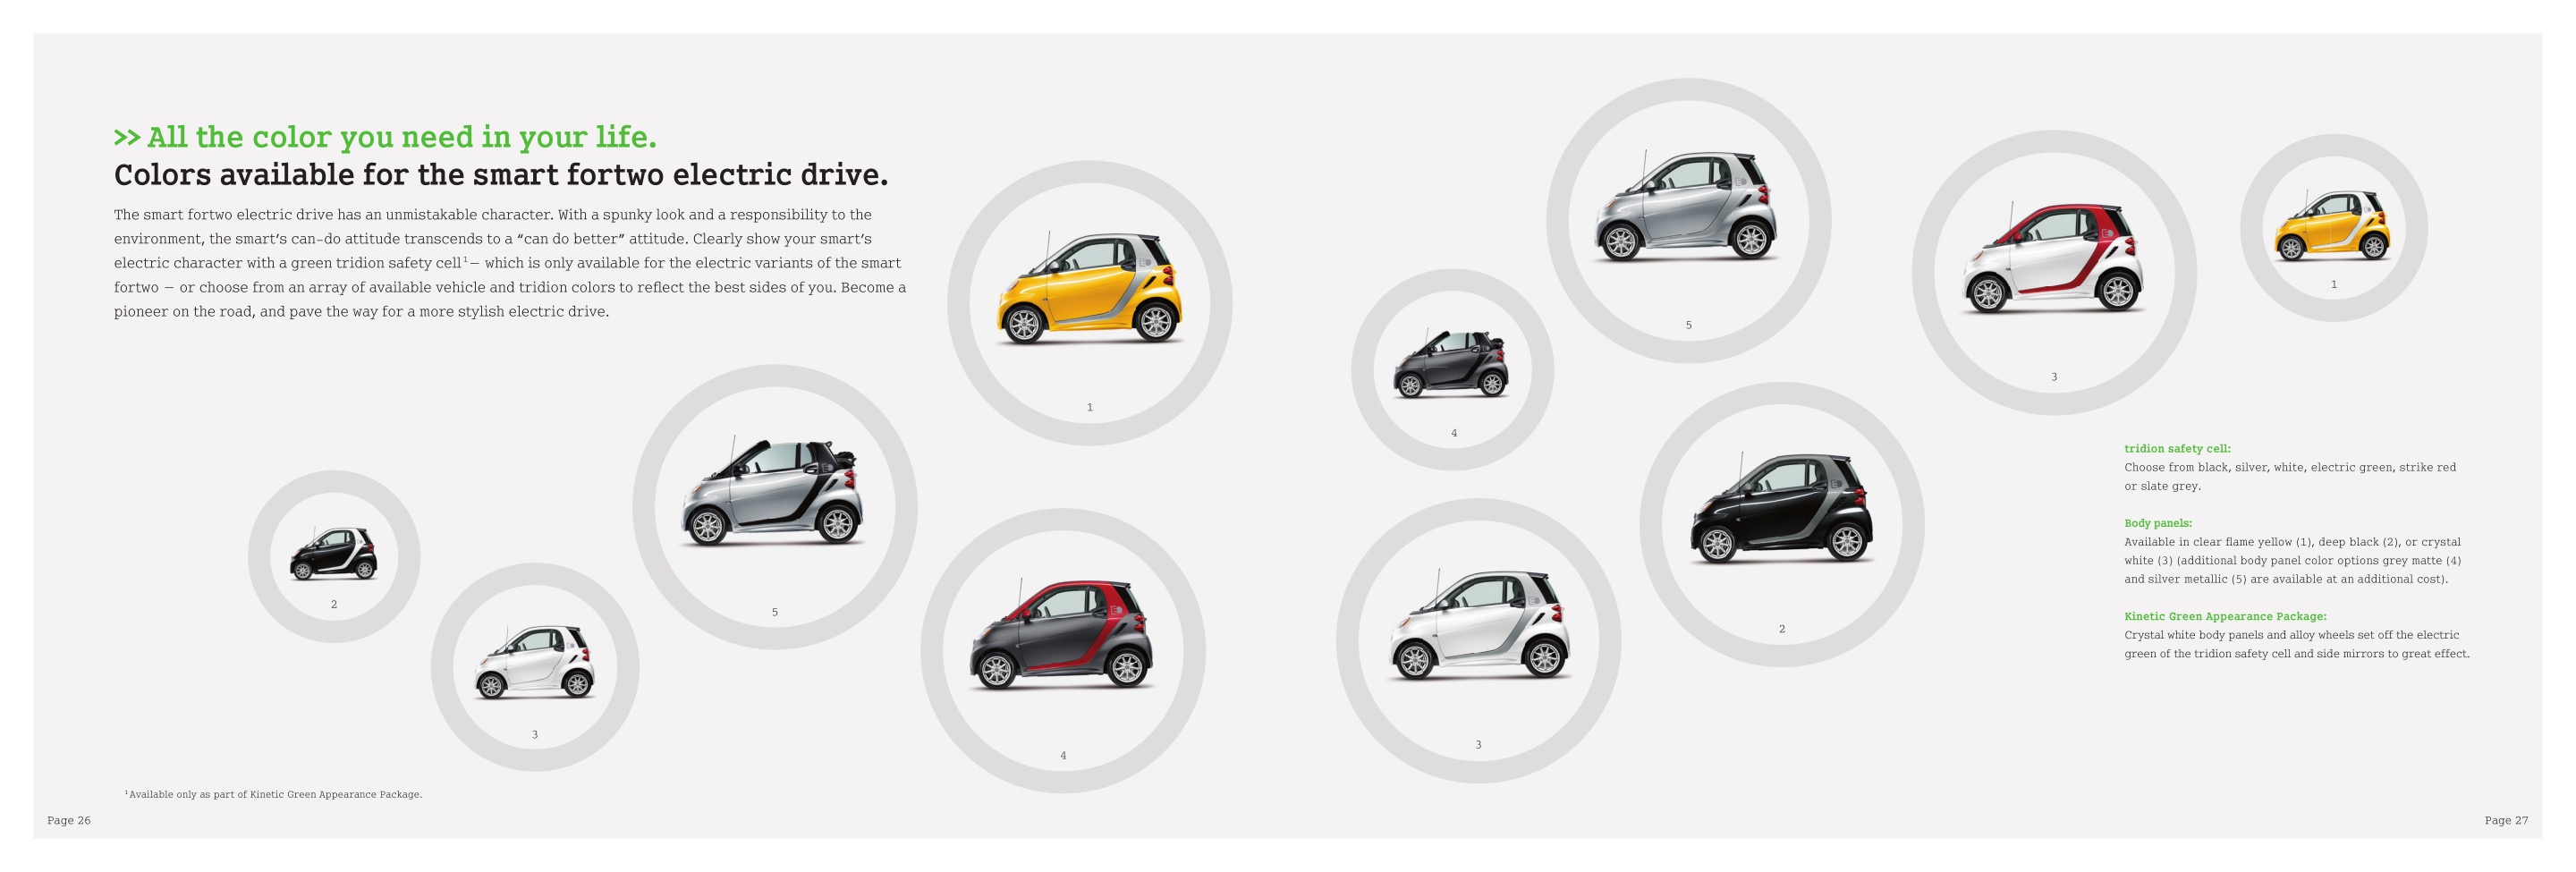 2015 Smart Fortwo Electric Brochure Page 13